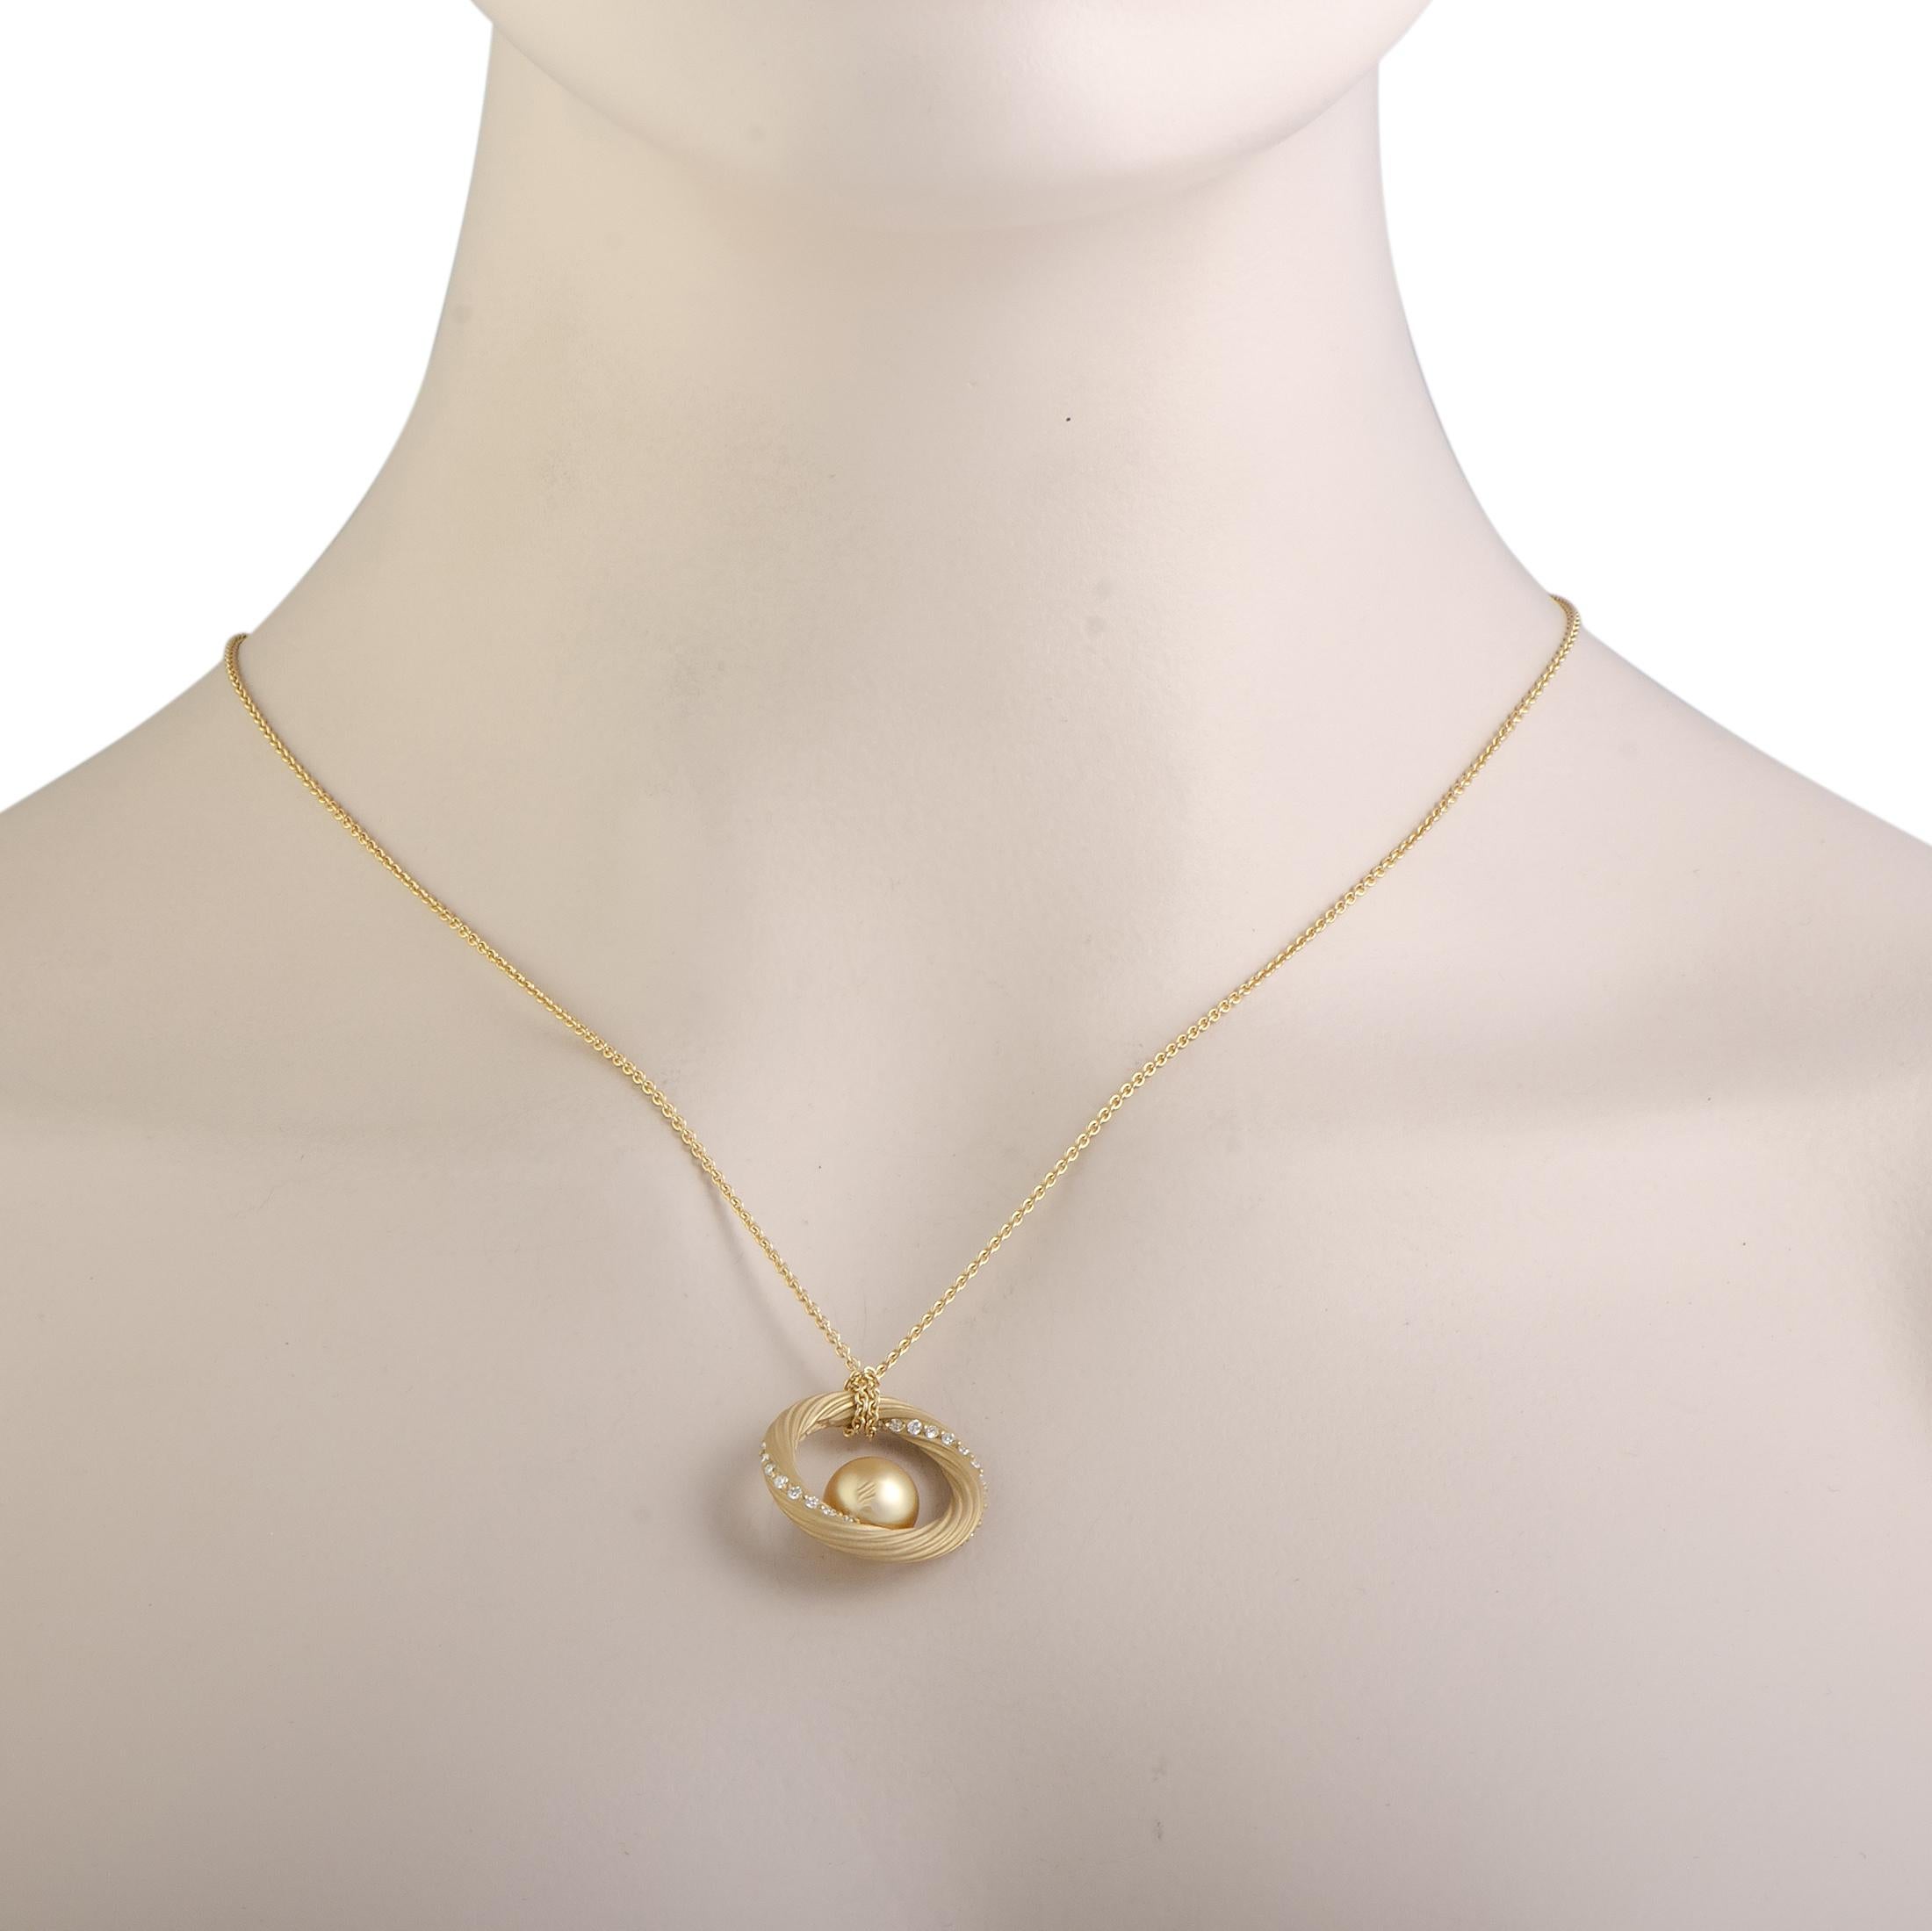 This exquisite necklace by Mikimoto is an attractive illustration of elegance! Gorgeously designed in shimmering 18K yellow gold, the stunning pendant is embellished with 0.40ct of scintillating diamonds and a gorgeous golden pearl of 9.5-10 mm that